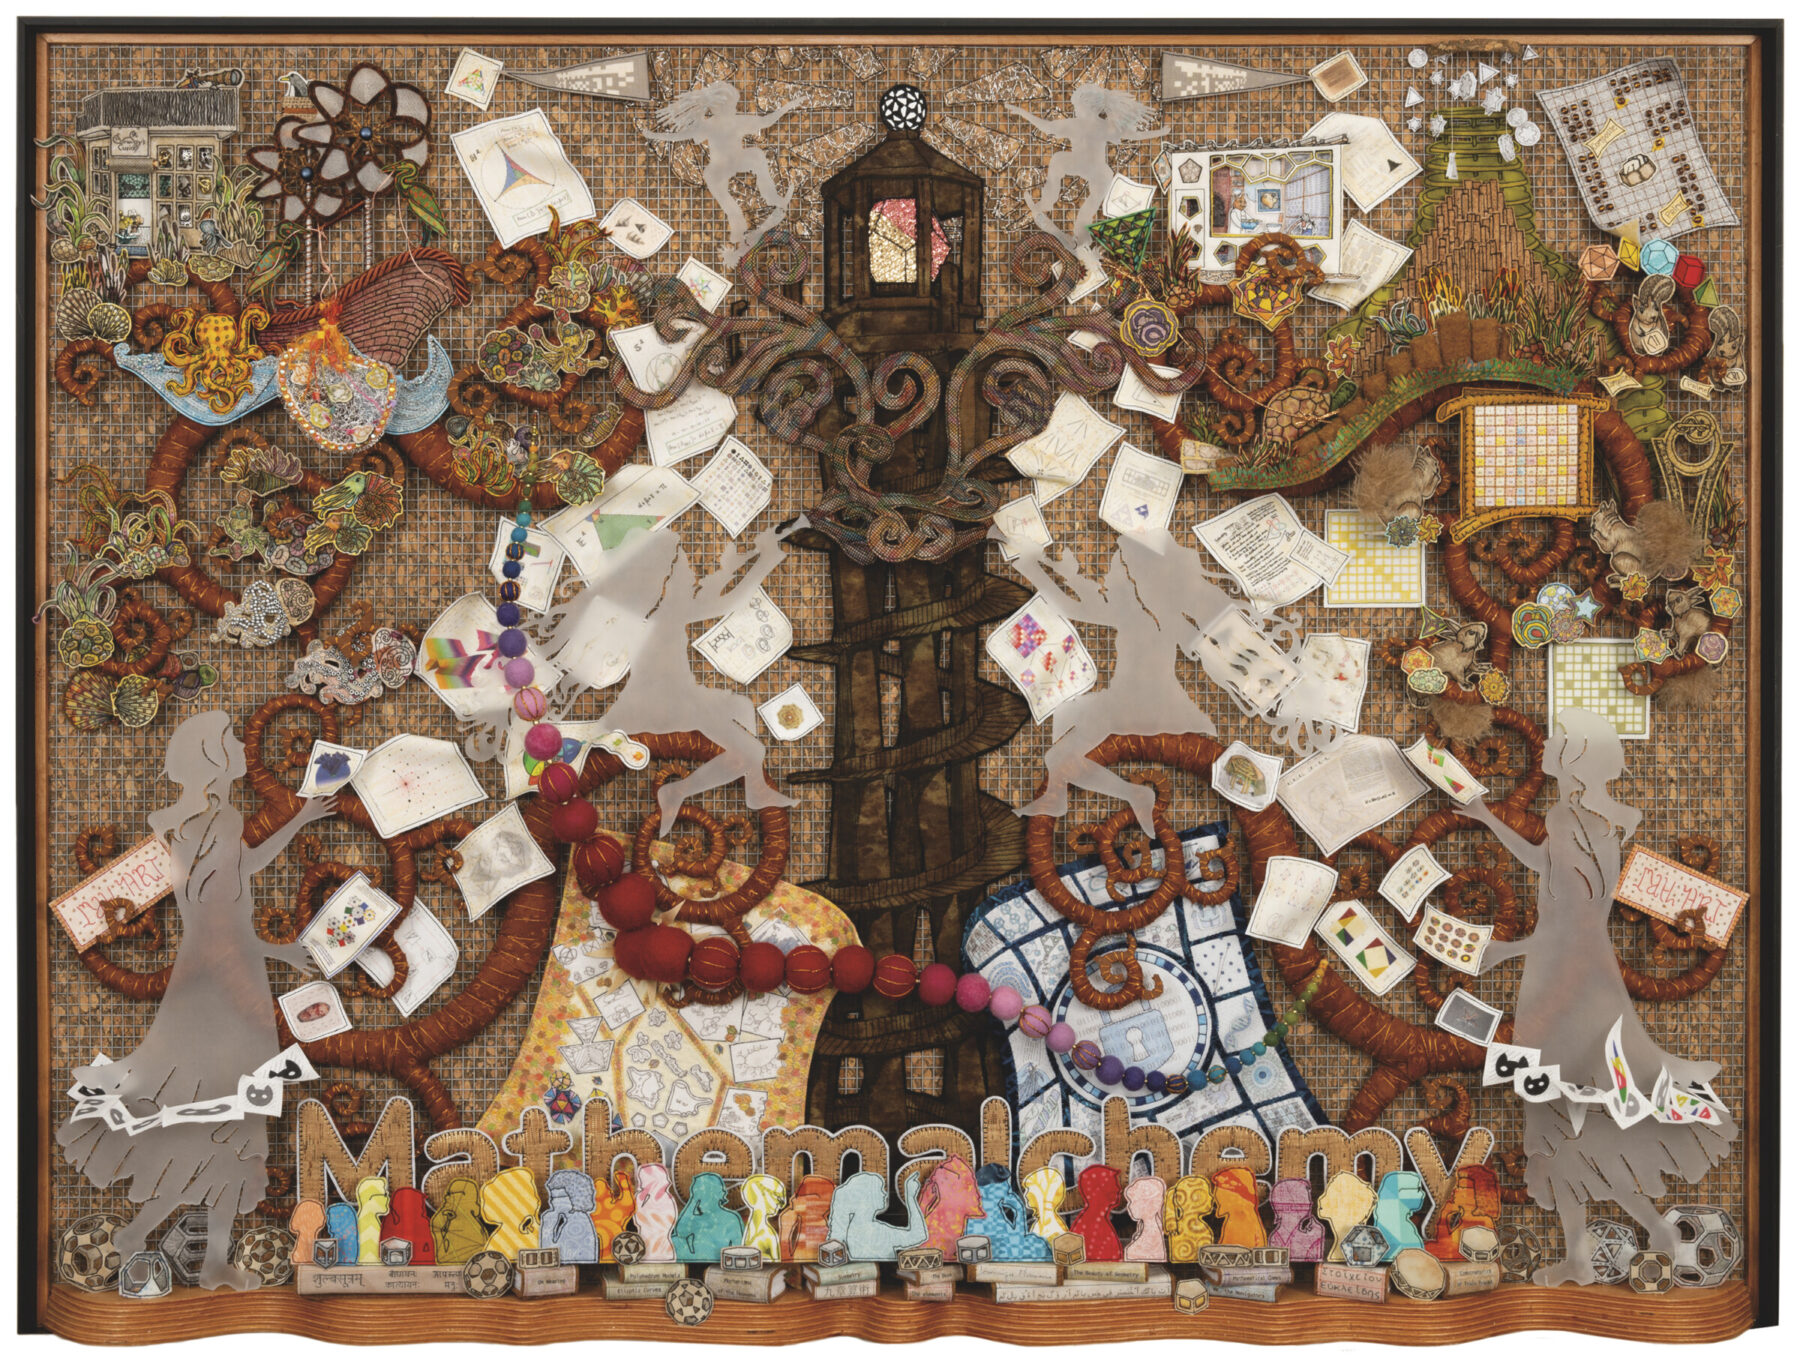 Dominique Ehrmann, "A Curious Collaboration," 2022–2023, textiles and acrylic on cork with wood frame, 30.5 x 40.5 x 3.5 inches. Permanent collection of the National Academy of Sciences.